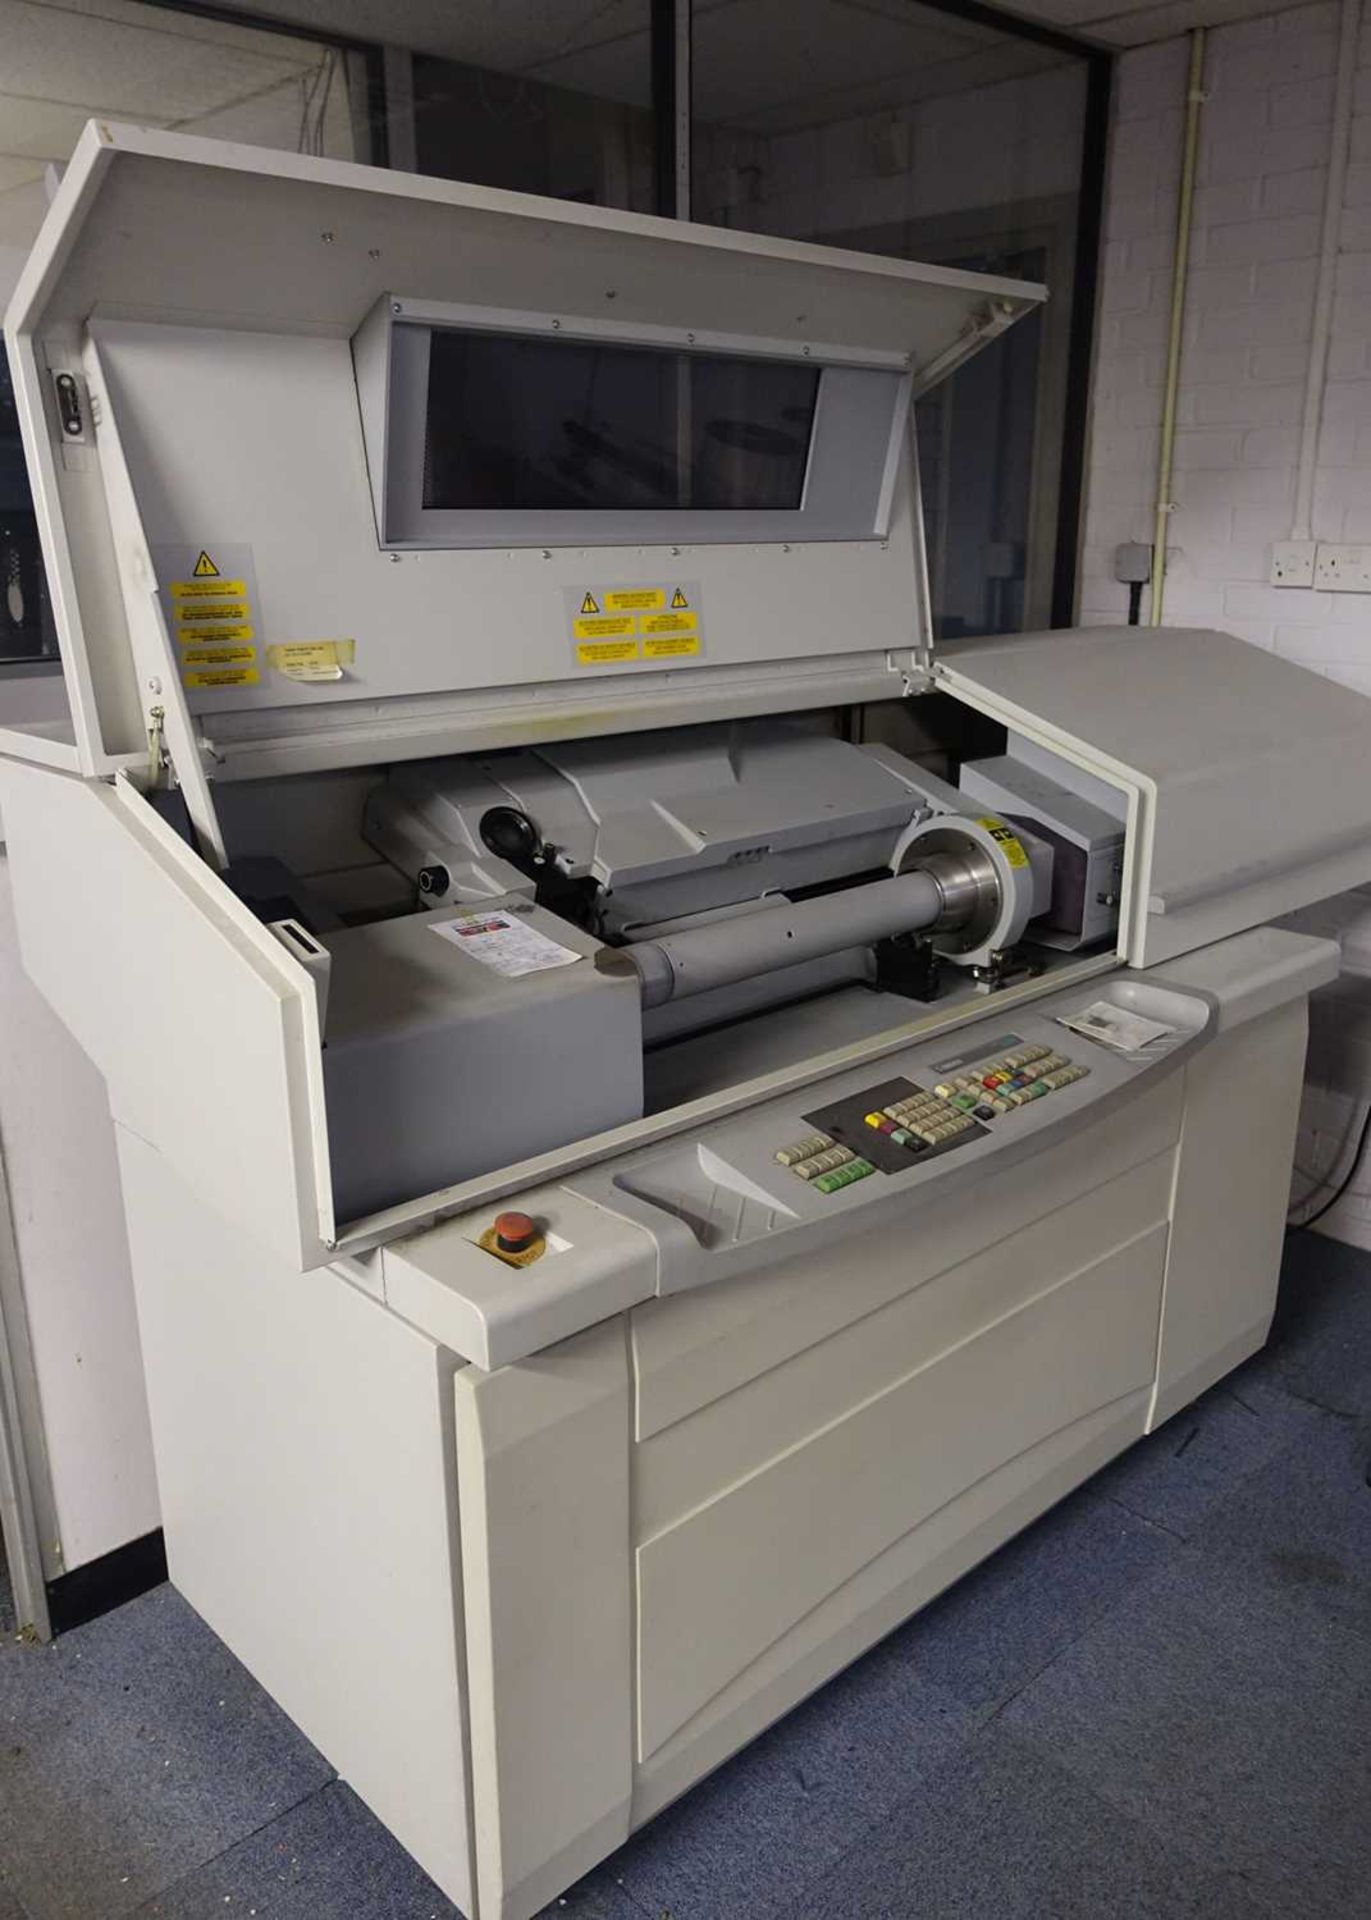 +VAT Crosfield model CELSIS 6200 drum scanner with drums and associated equipment (will need